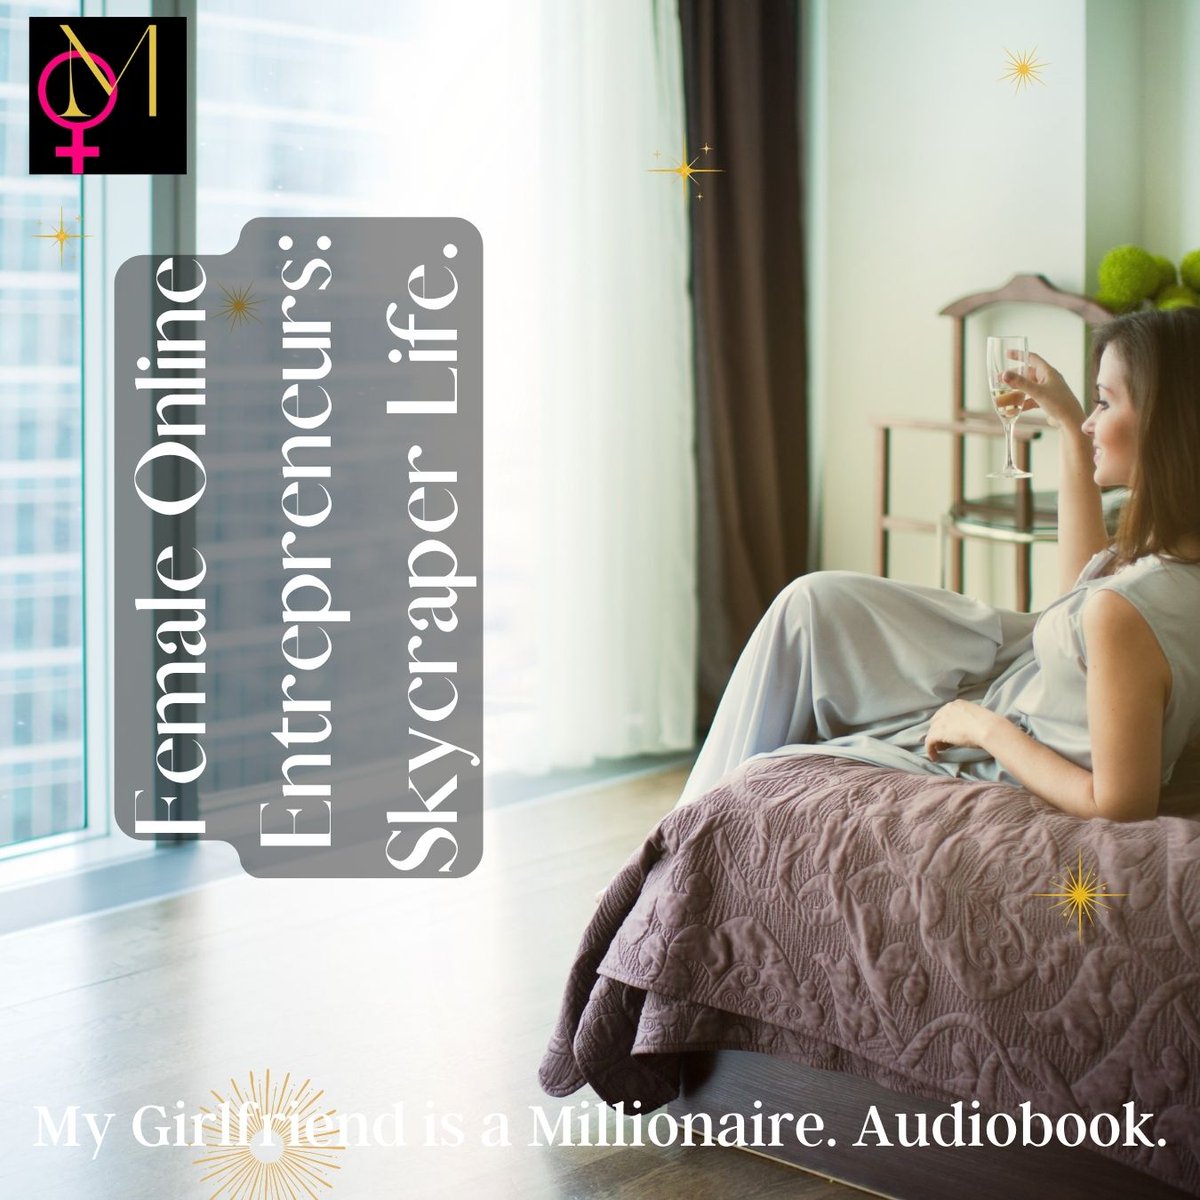 Female #onlineEntrepreneurs often life the #skyscraperlife. Since I am together with such a #selfmademillionaire I know the earth from above. Get ur copy, too: #thalia  #weltbild #BOL #Audioteka #wook  #googleplay  #Scribd #barnesandnoble #ibs  #kobo #XinXii #storytel